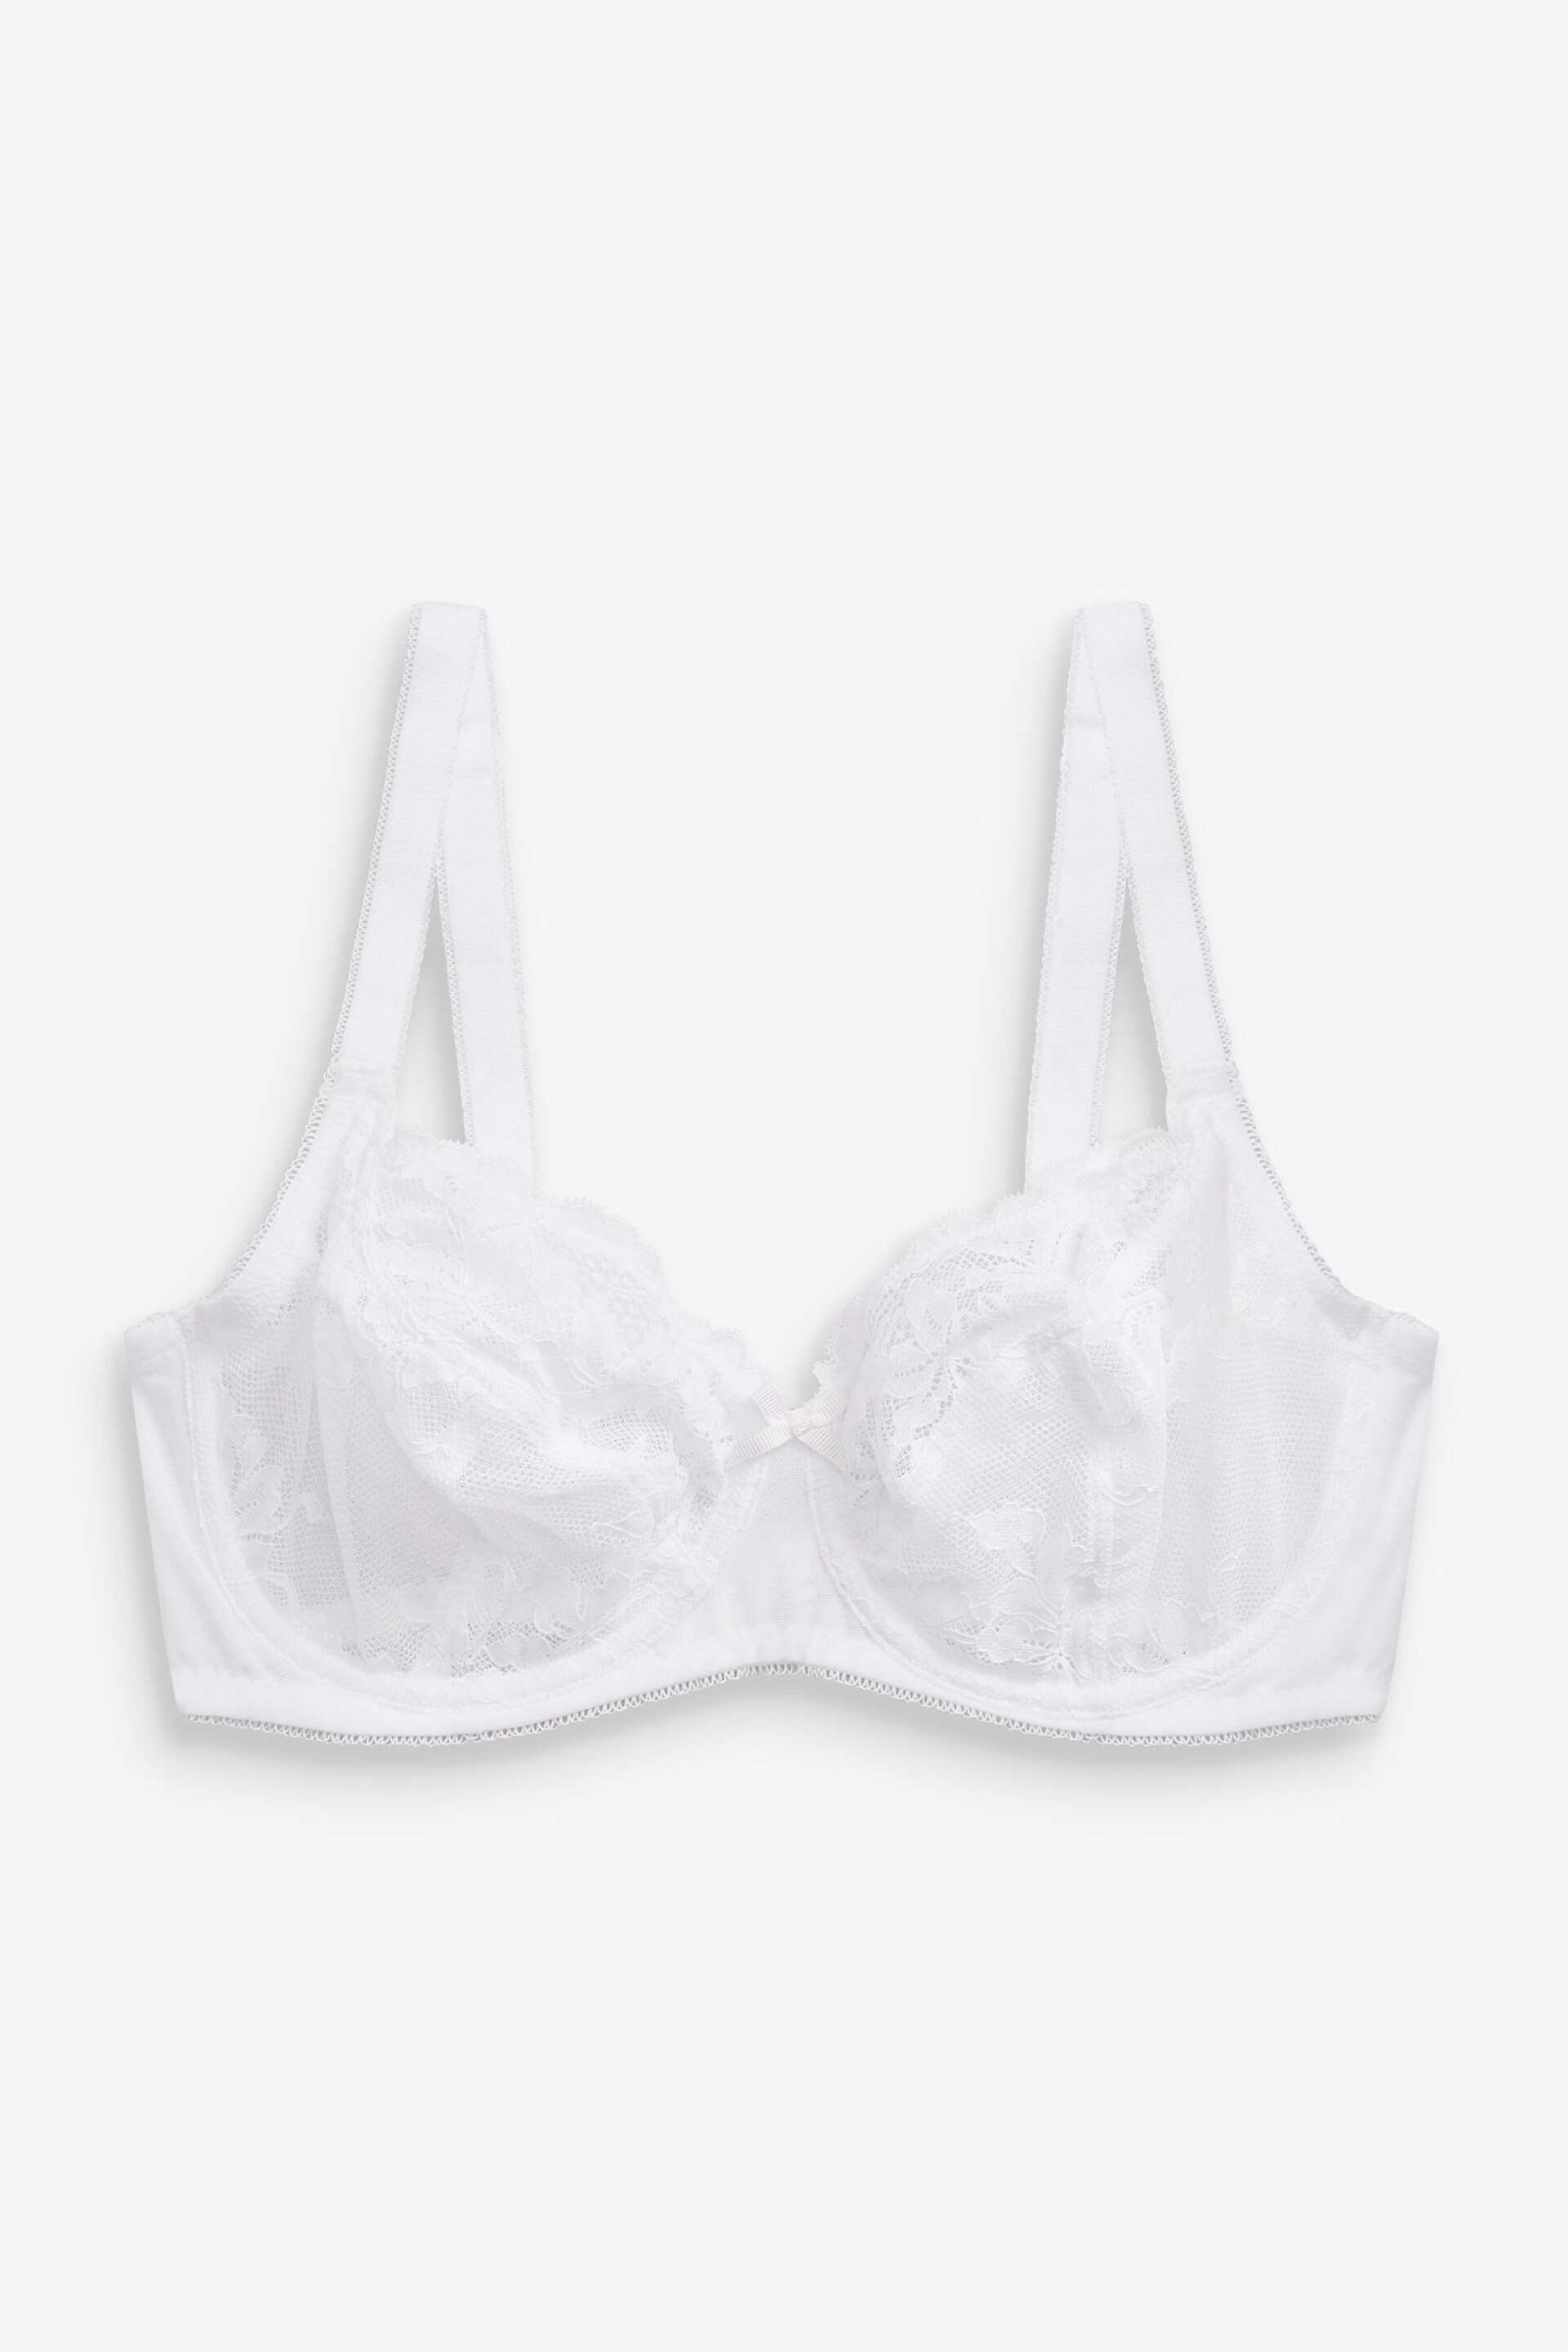 Black/White/Nude Non Pad Balcony DD+ Lace Bras 3 Pack - Image 7 of 7